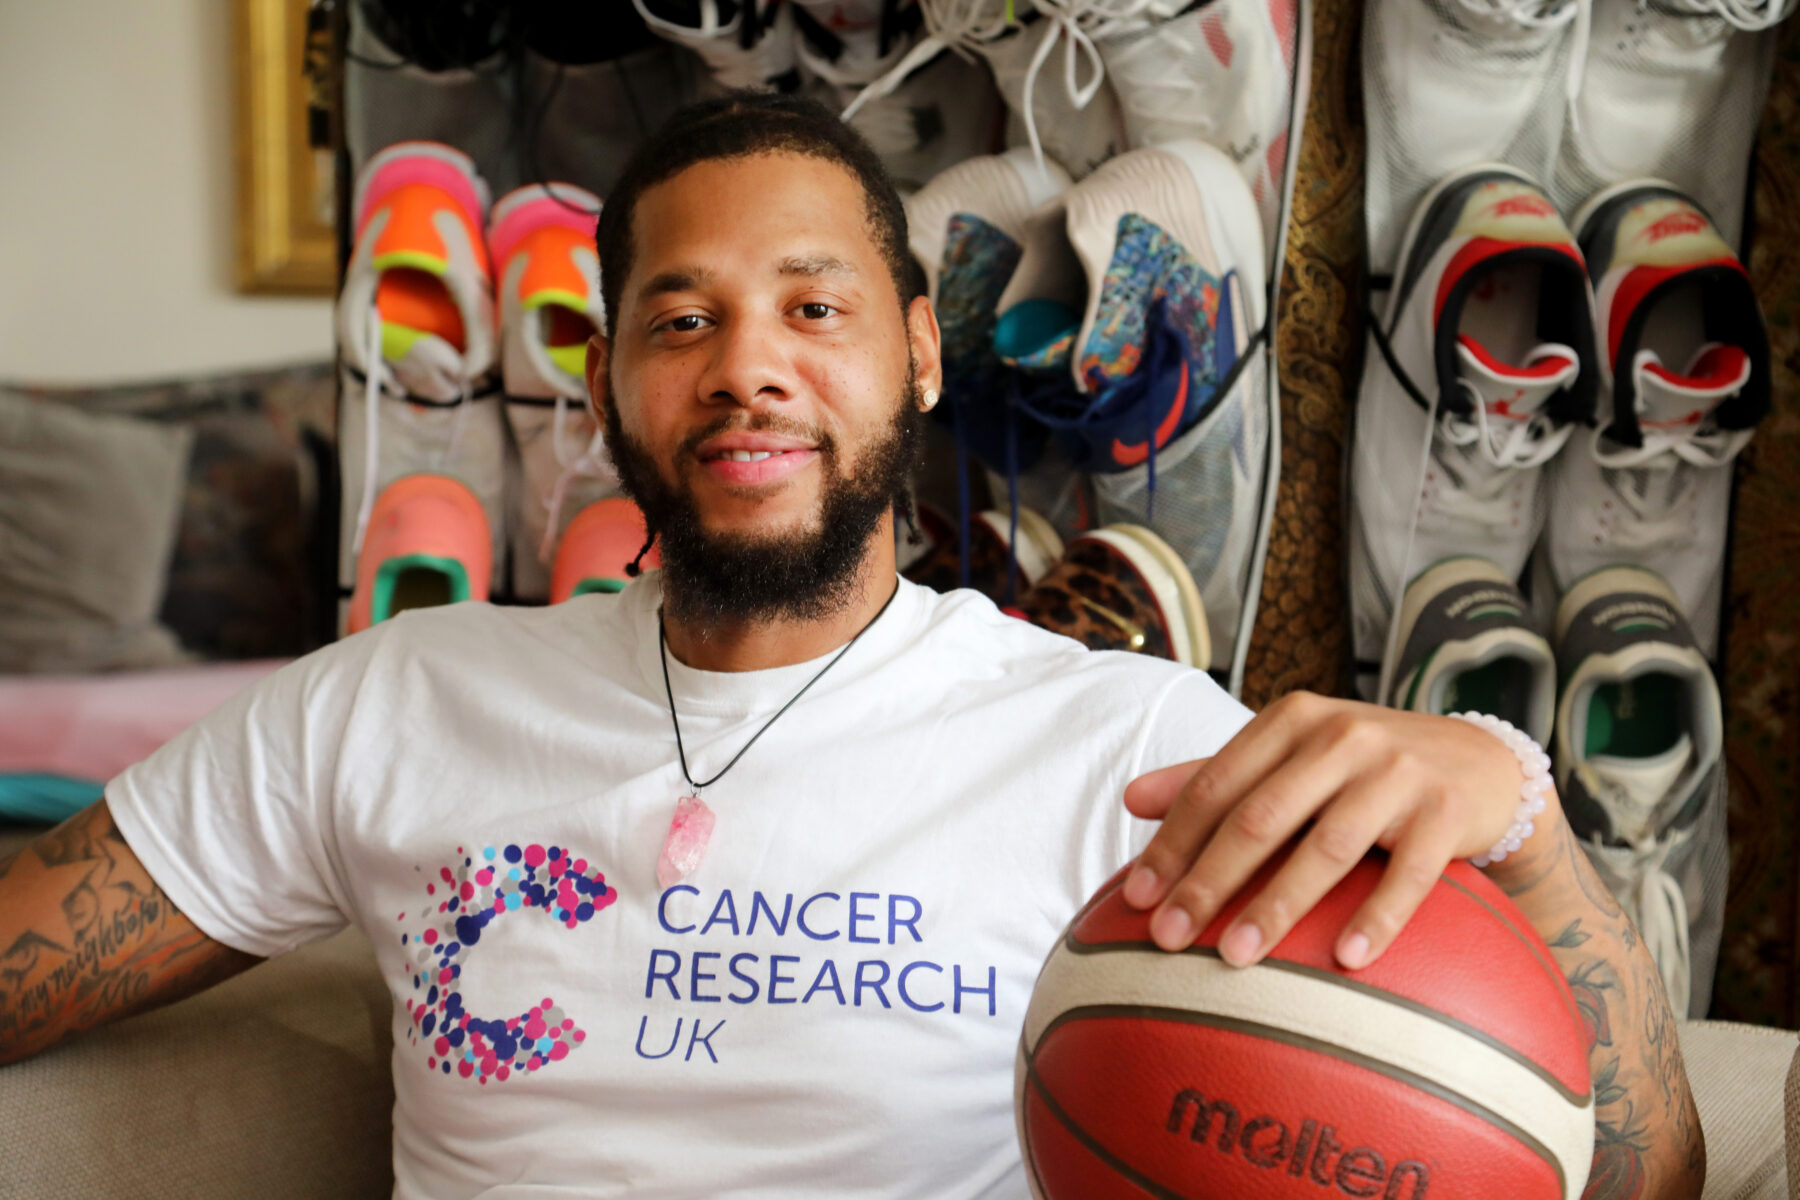 Basketball player Will Wise wearing a Cancer Research UK t-shirt